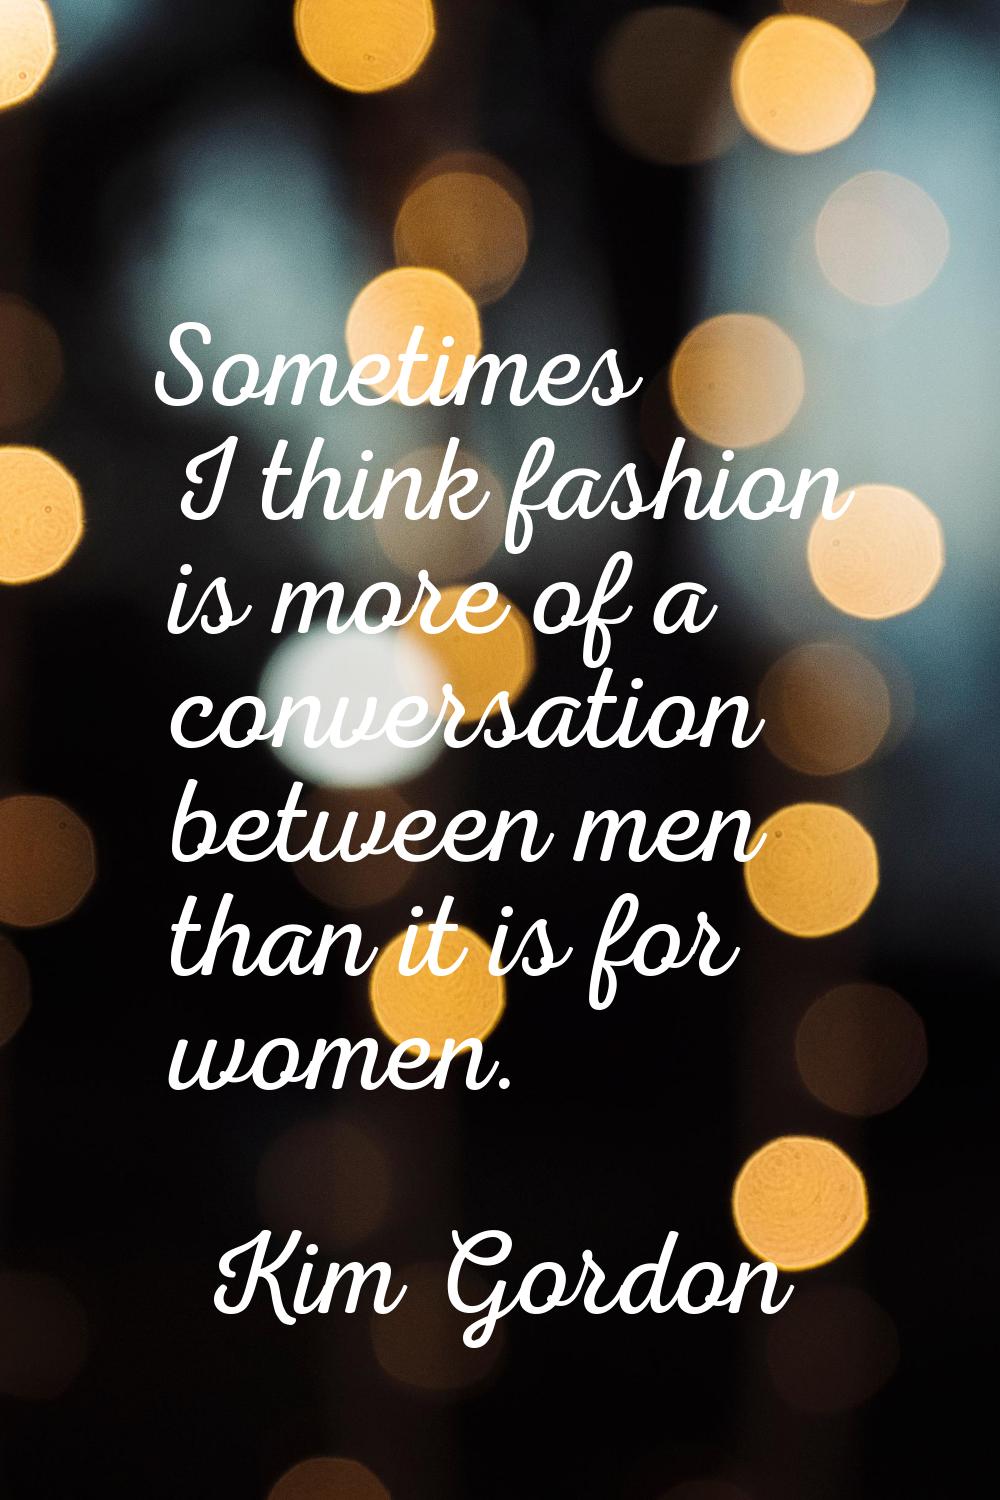 Sometimes I think fashion is more of a conversation between men than it is for women.